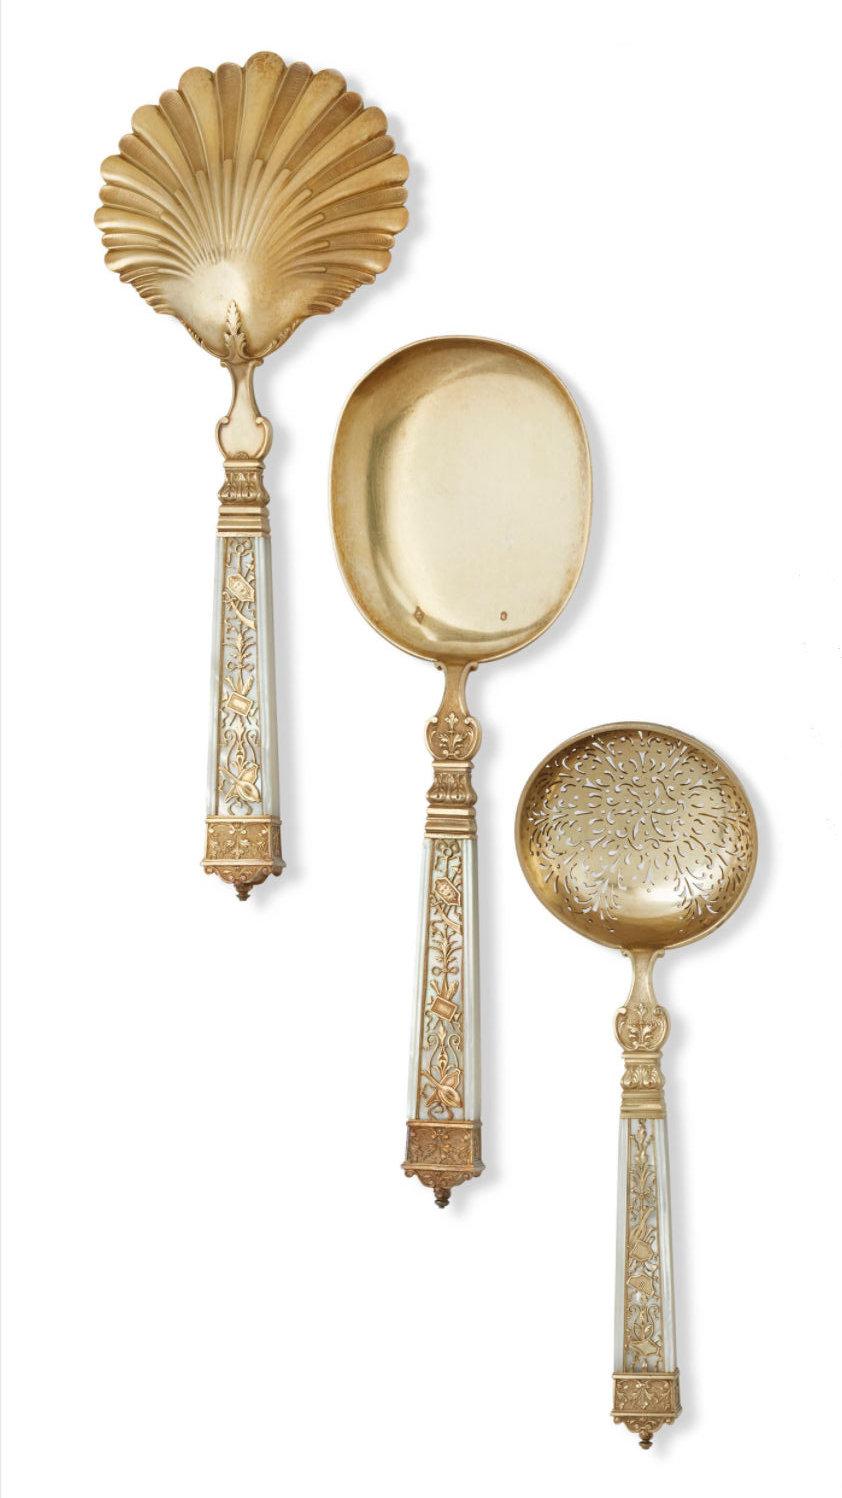 Our 96 piece vermeil silver dessert service by Maison Cardeilhac (1804-1951) of Paris, circa 1910s, features exceptional openwork trophies depicting musical instruments and dramatic masks on mother-of-pearl grounds. Includes 24 spoons, 22 forks,